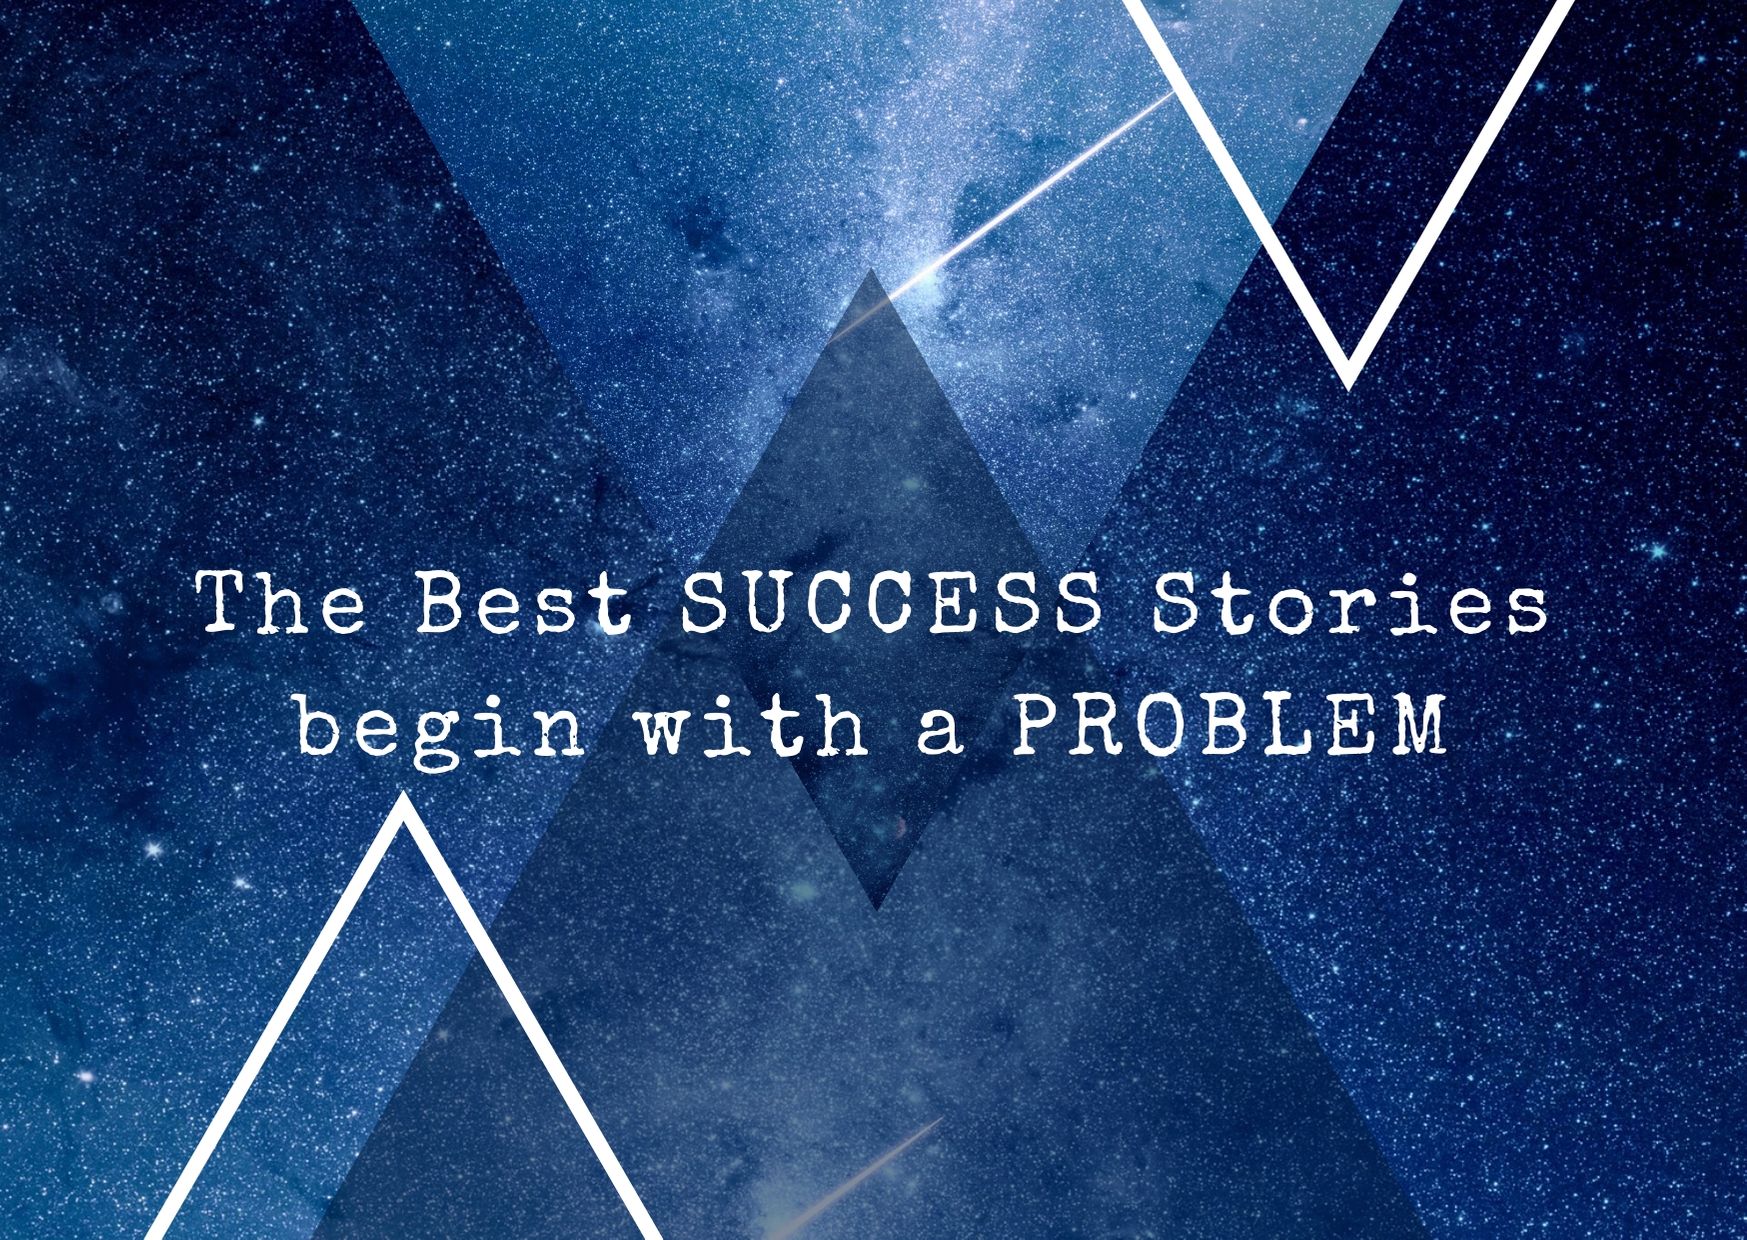 The best success stories begin with a problem